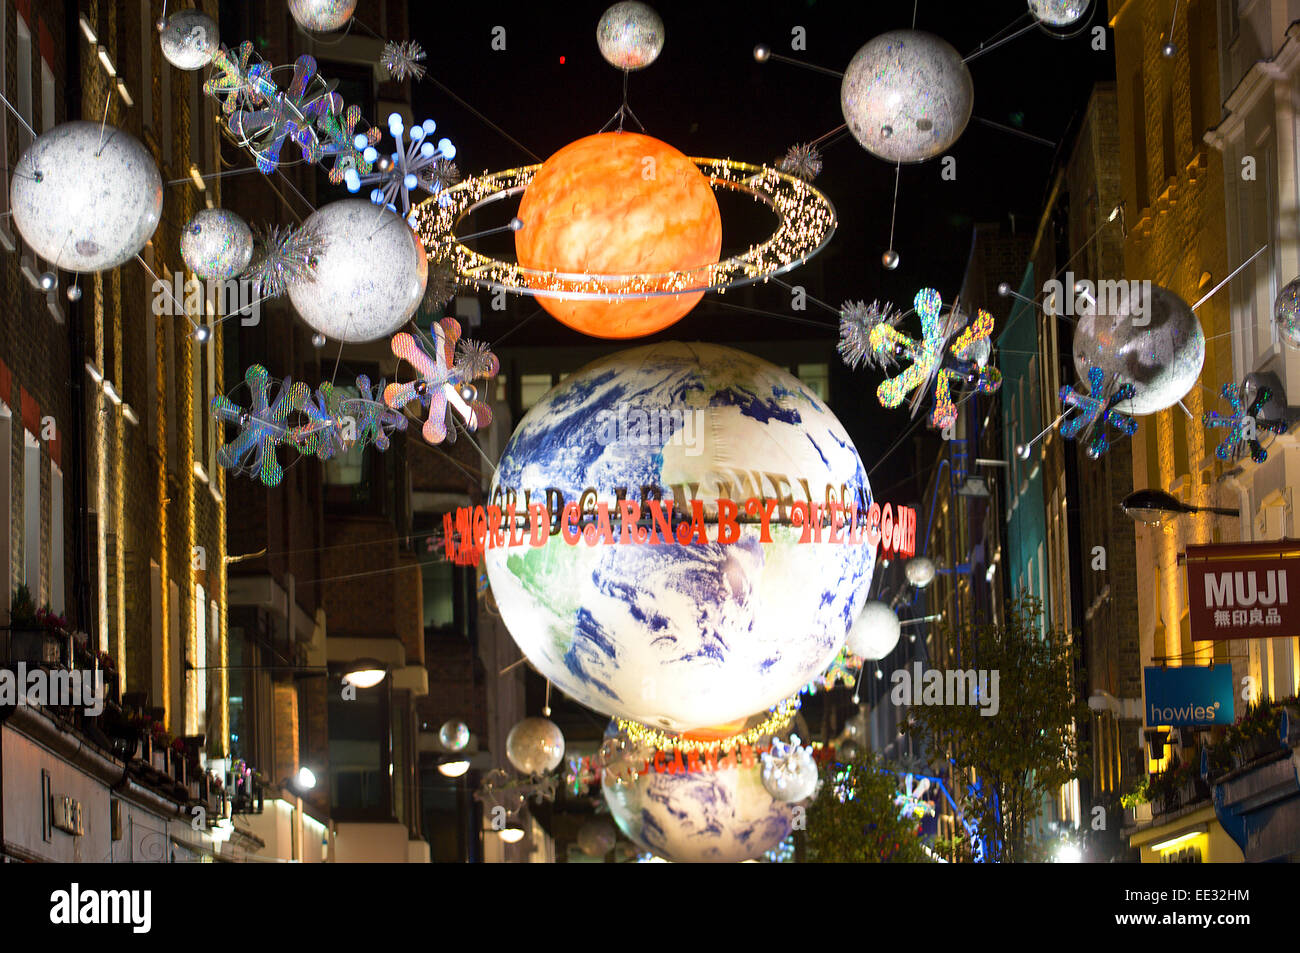 Carnaby Street is only one of many central London streets decorated with imaginative displays of overhead lights at Christmas. Stock Photo